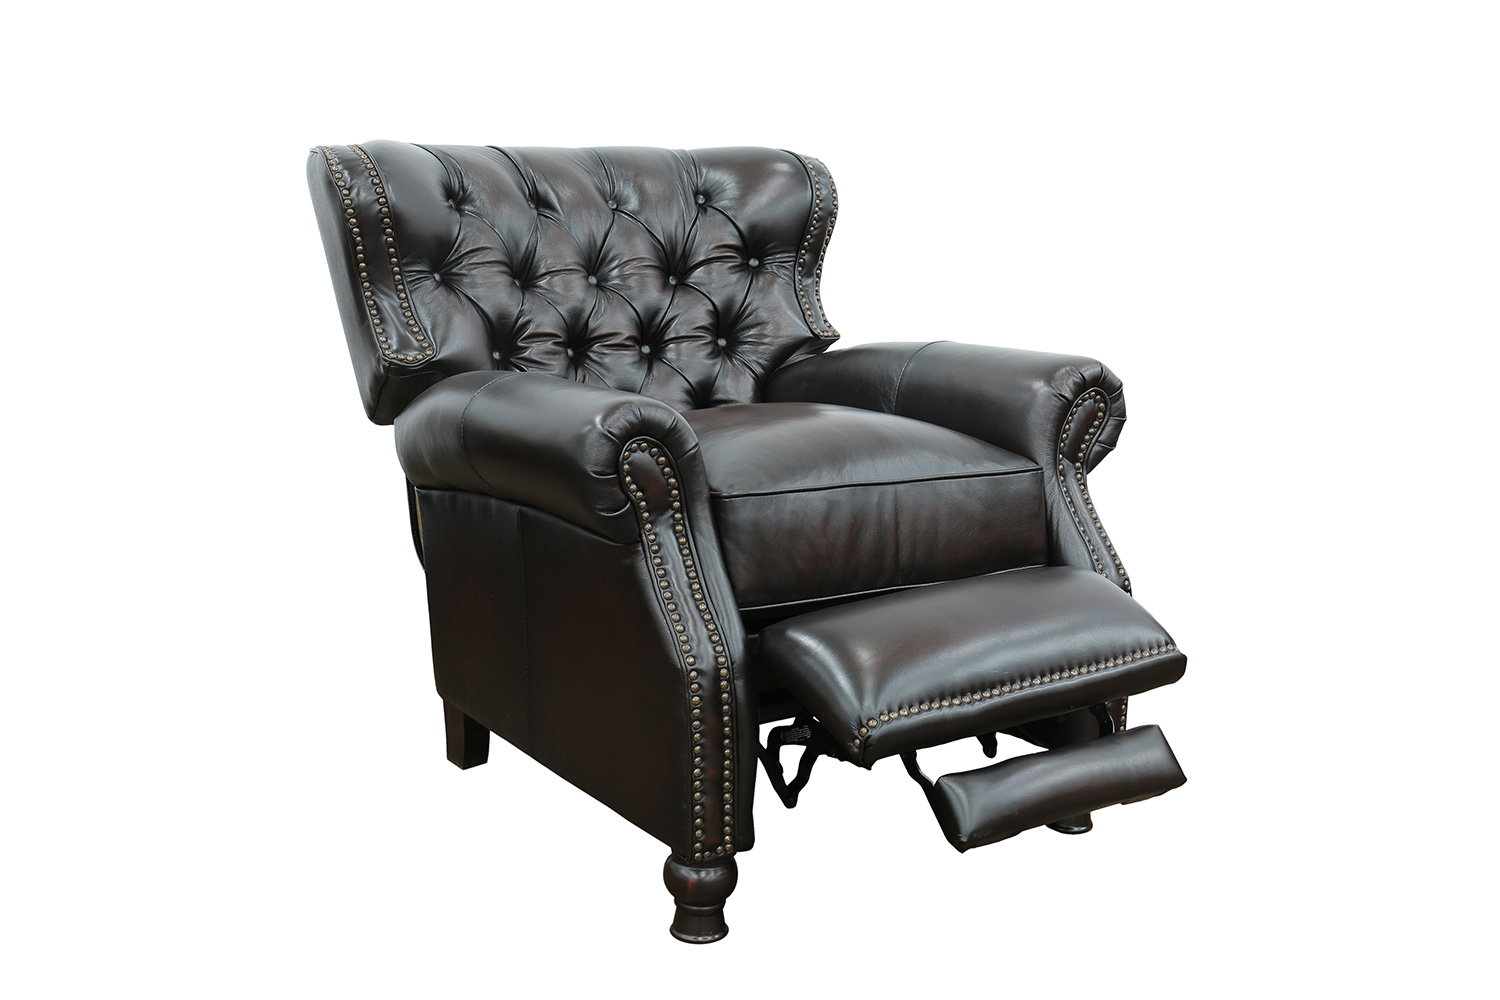 Barcalounger Presidential Recliner Chair - Stetson Coffee/All Leather